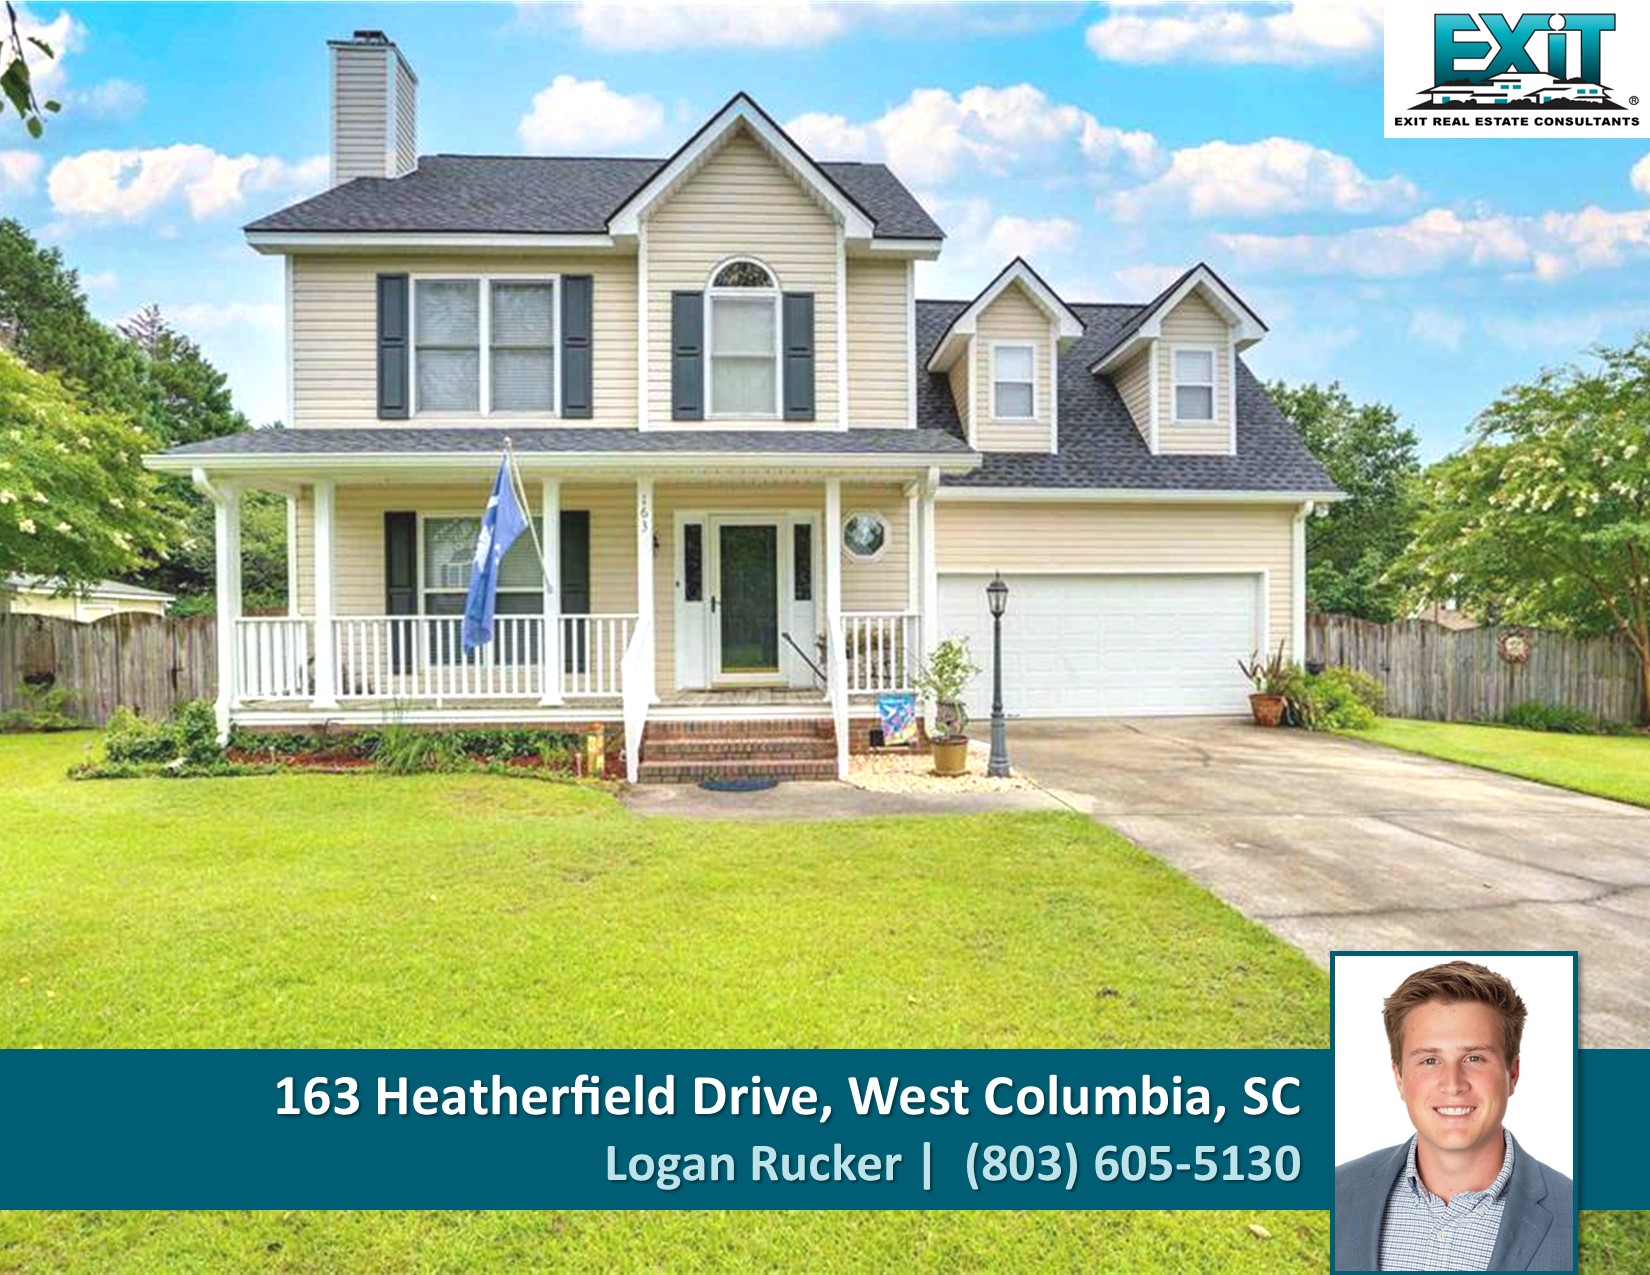 Just listed in Magnolia Ridge - West Columbia